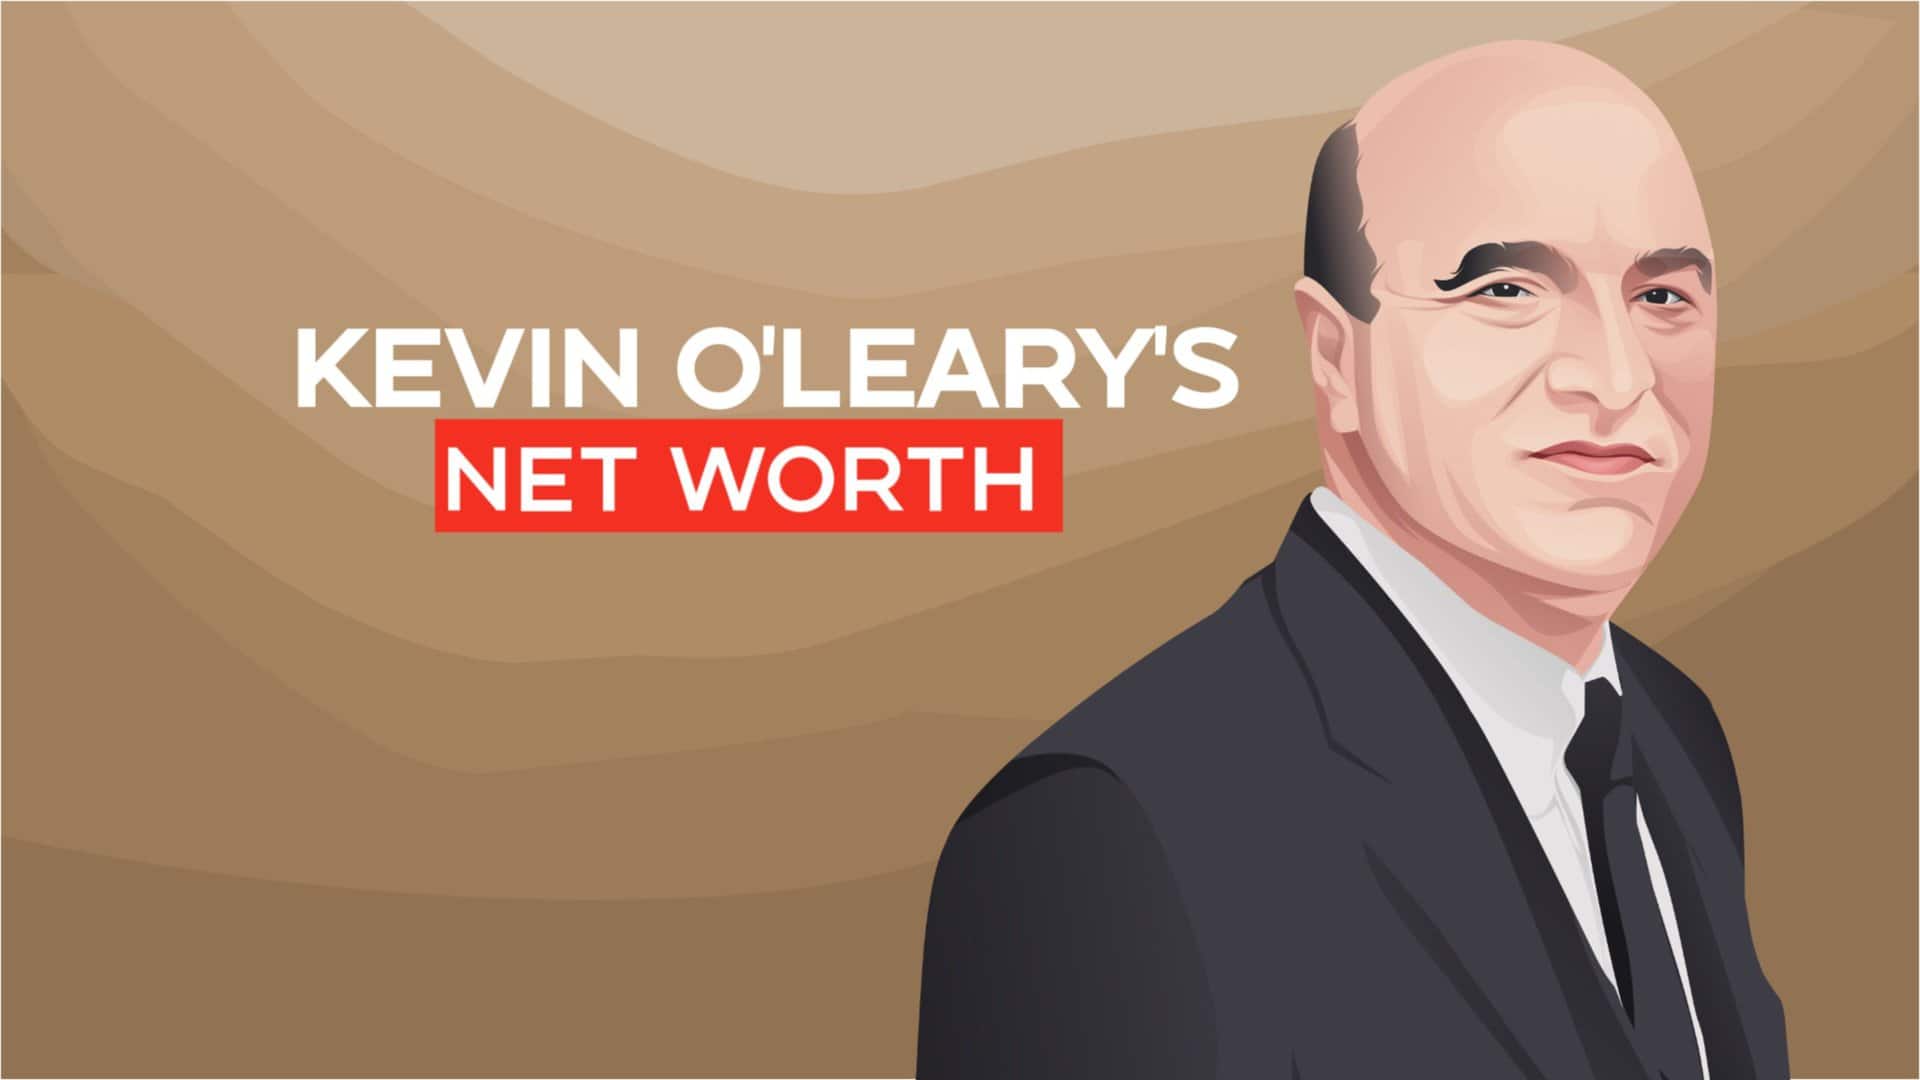 Shark Tank's Kevin O'Leary takes this approach to corporate